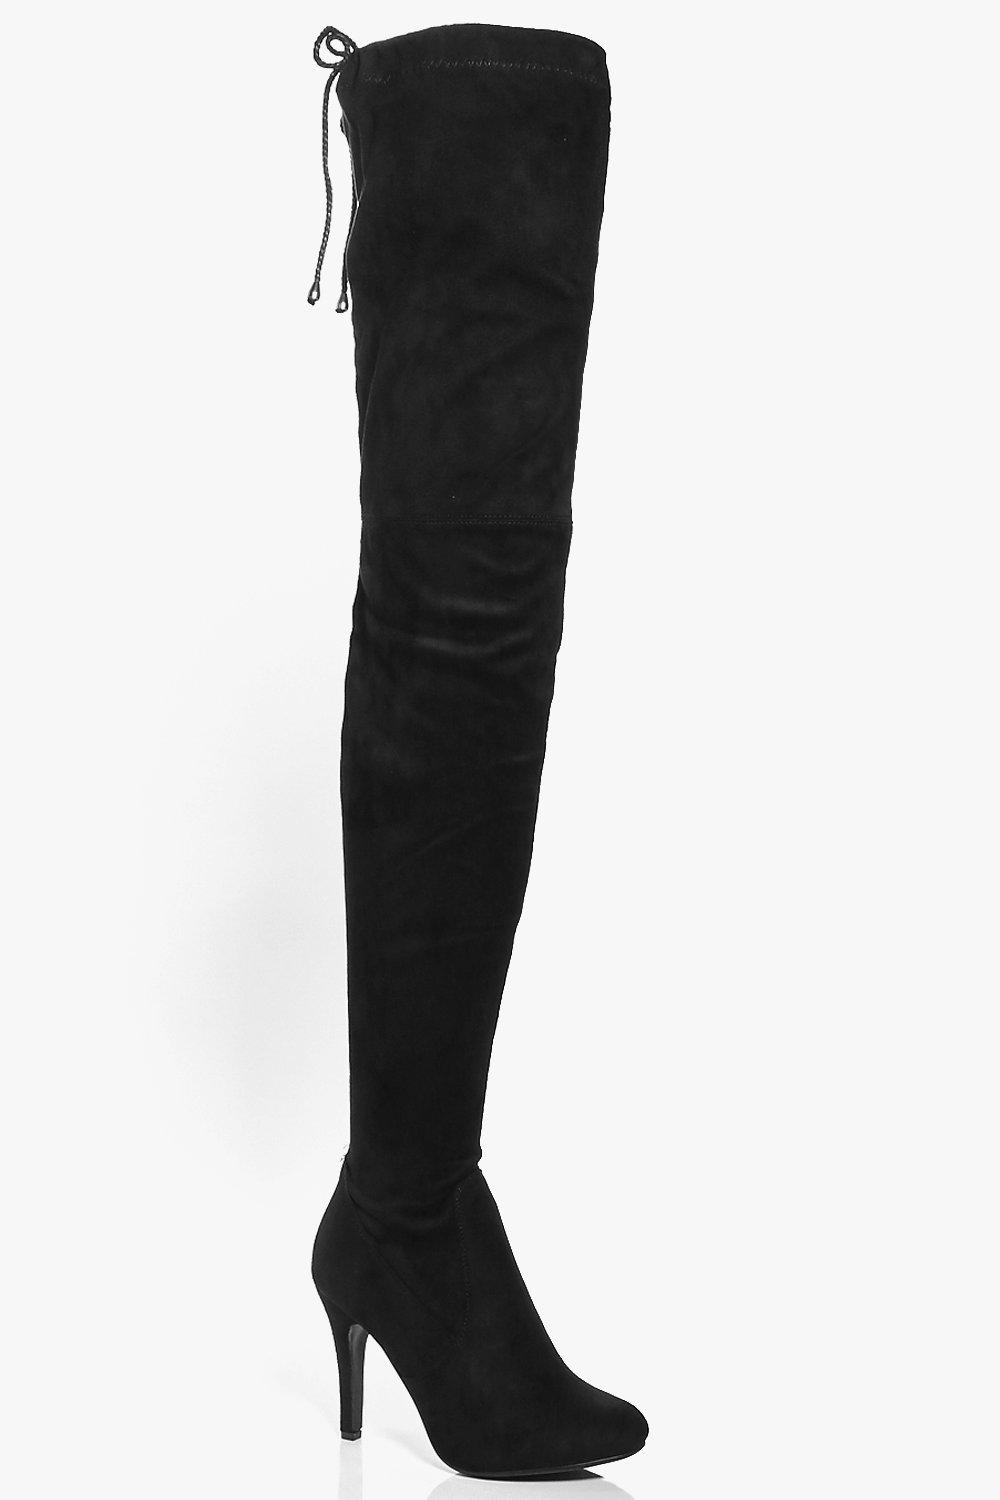 what stores sell thigh high boots